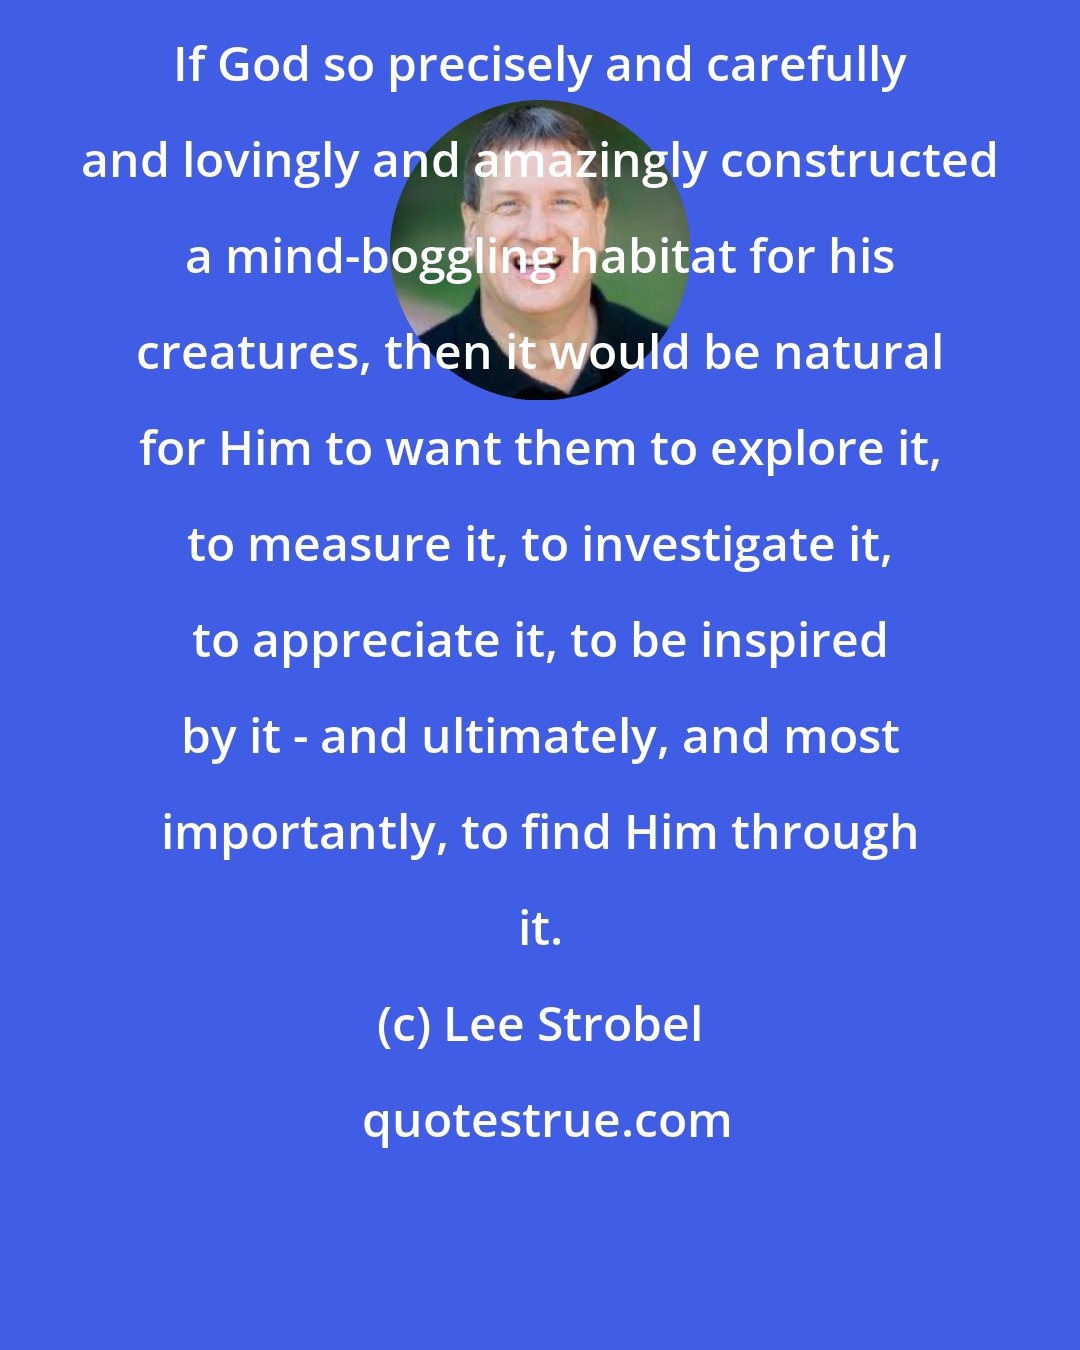 Lee Strobel: If God so precisely and carefully and lovingly and amazingly constructed a mind-boggling habitat for his creatures, then it would be natural for Him to want them to explore it, to measure it, to investigate it, to appreciate it, to be inspired by it - and ultimately, and most importantly, to find Him through it.